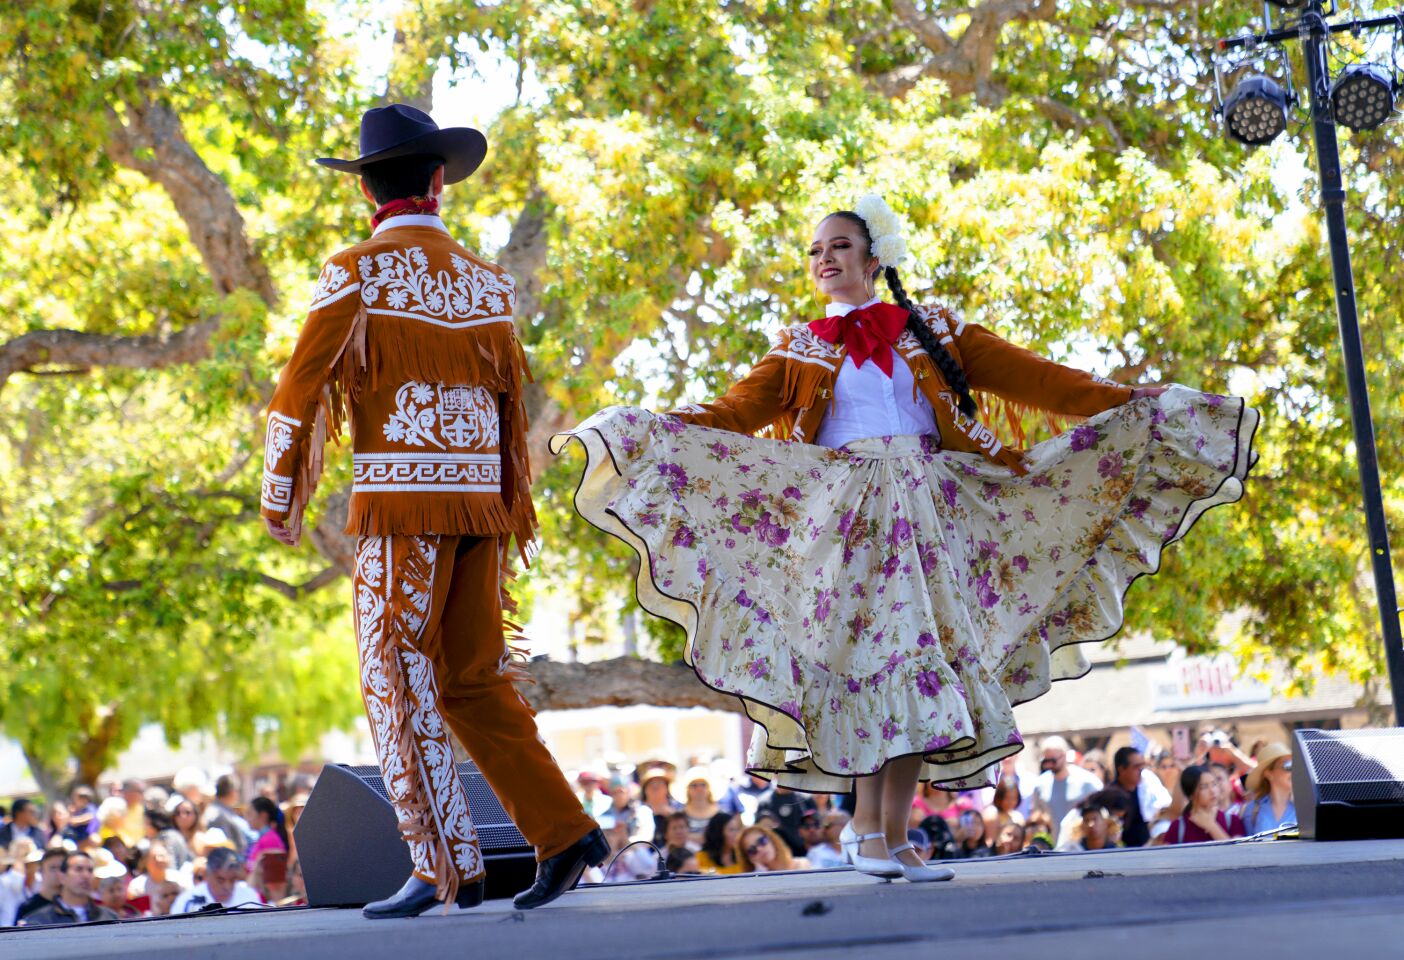 Mariana Perezchica and Jorge Romero from the group "Ballet Folklorico Coreografico Ti-Pai" from Chula Vista compete on stage in the Folklorico Festival during the Cinco de Mayo celebration on Sunday at Old Town in San Diego.